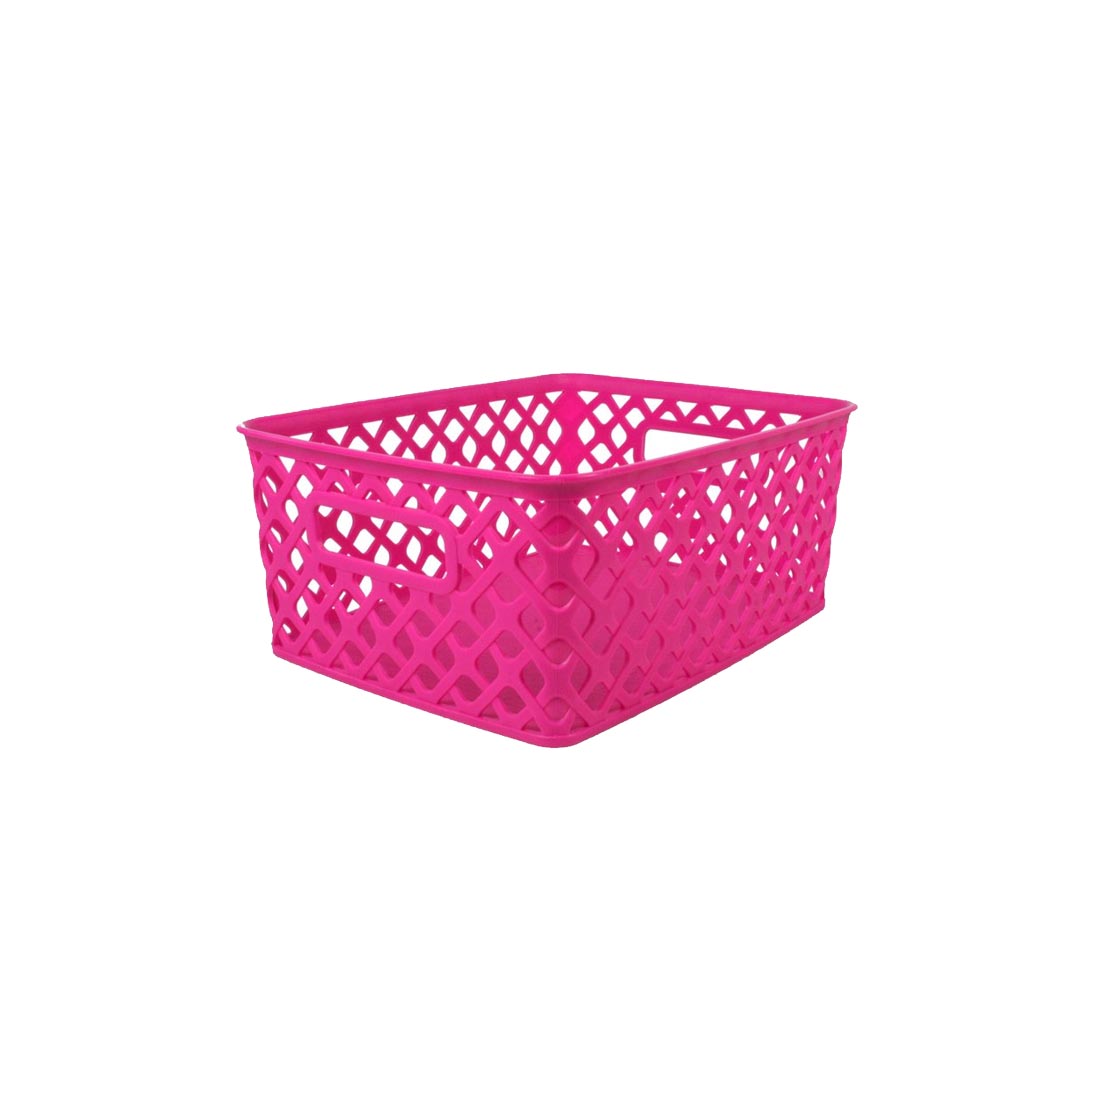 Romanoff Products Small Hot Pink Weave Storage Basket